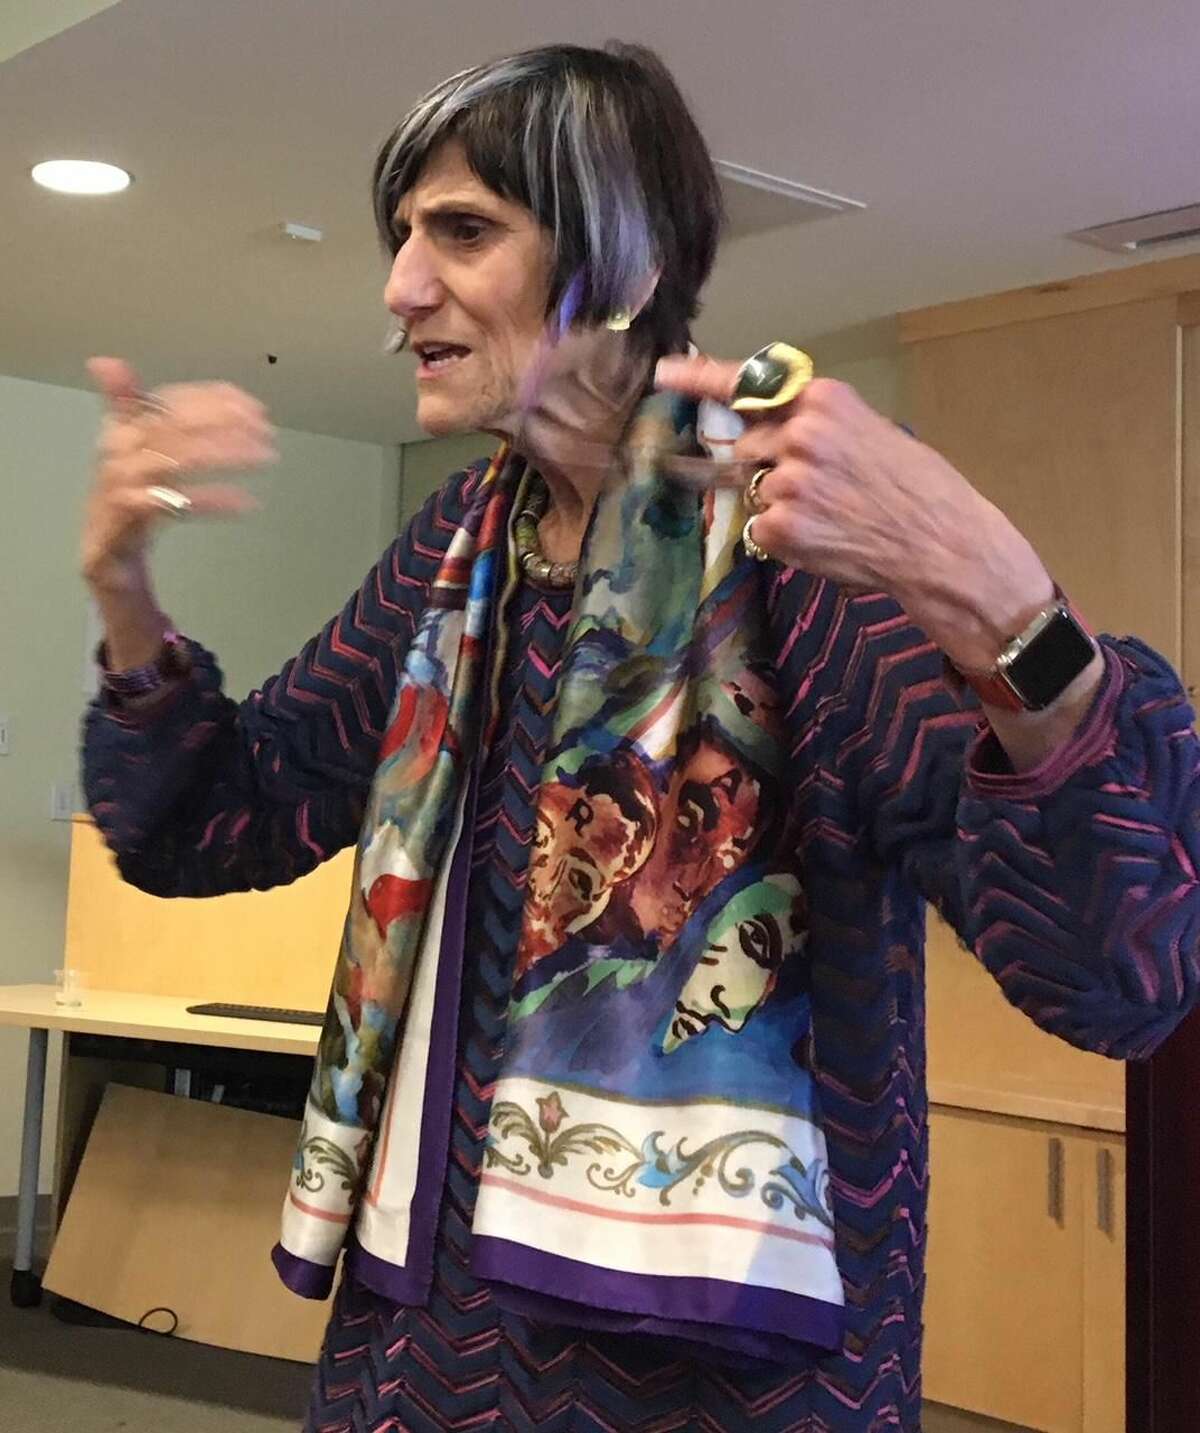 U.S. Rep. Rosa DeLauro said she will fight for women's health issues on all fronts. She said the public has to speak up, particularly on next Supreme Court justice..